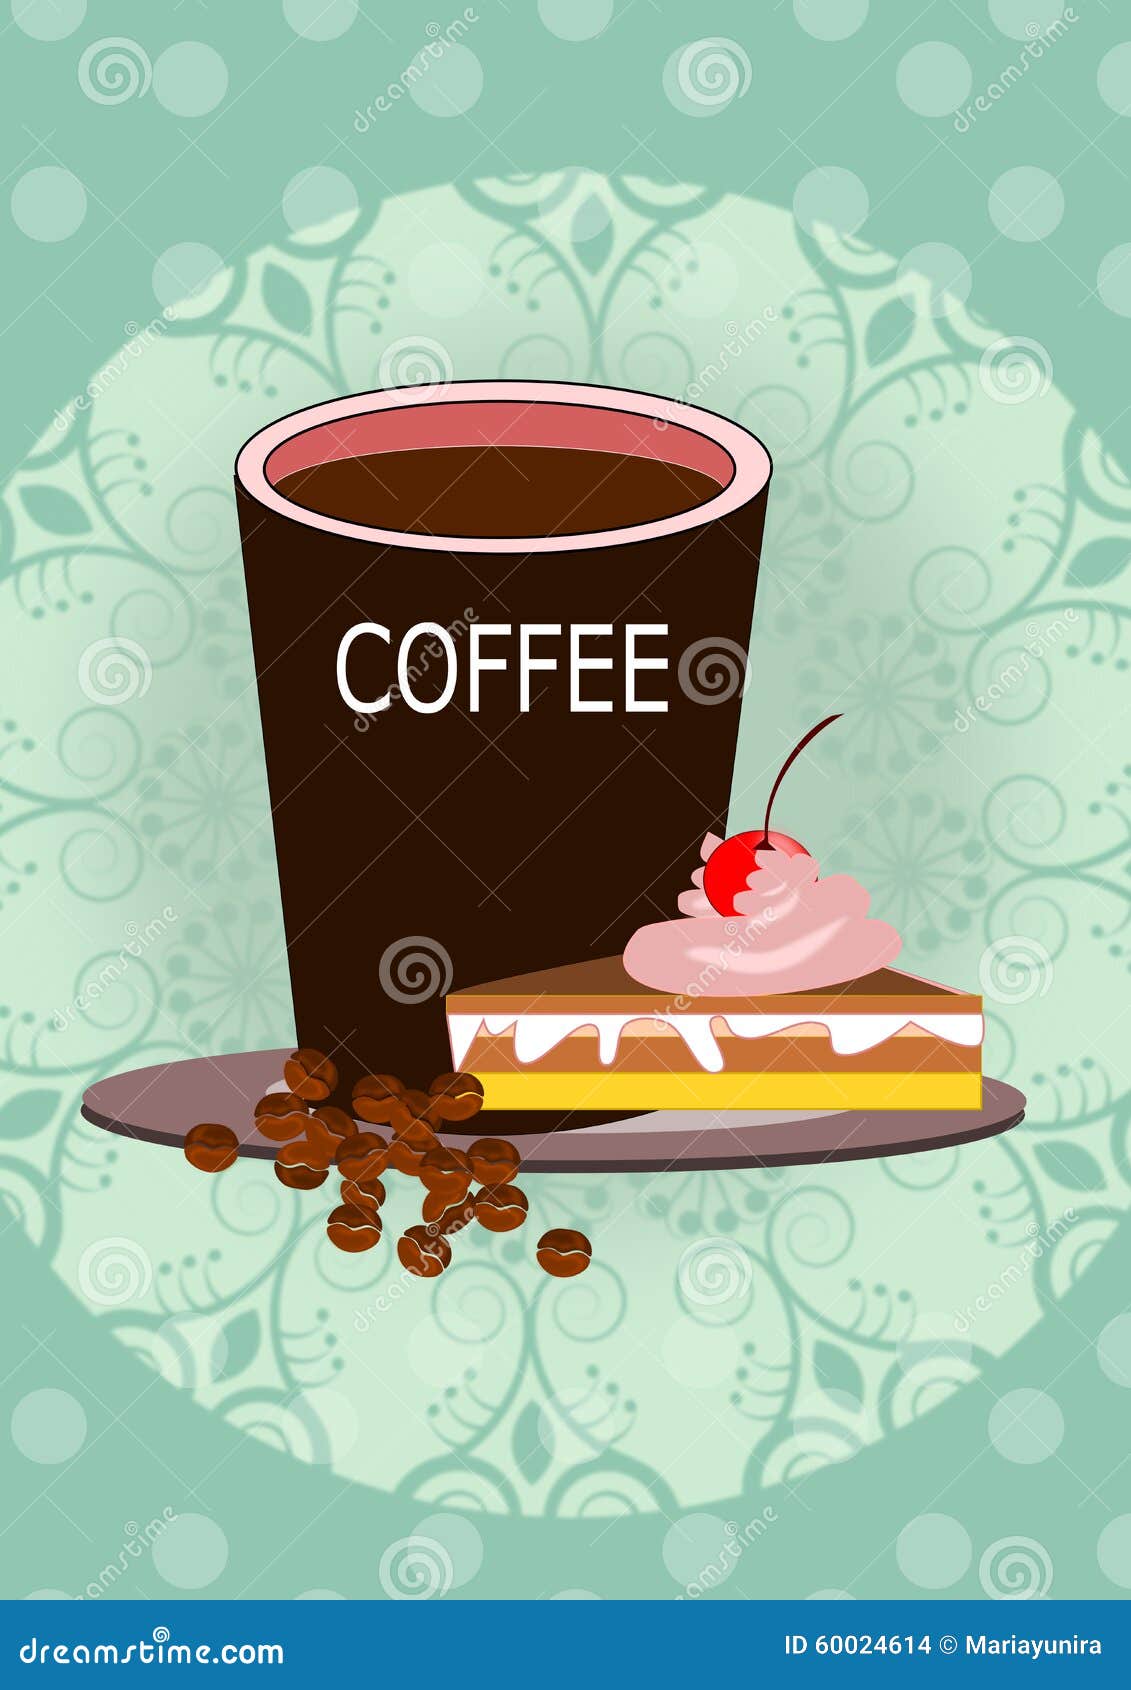 clipart coffee and cake - photo #35